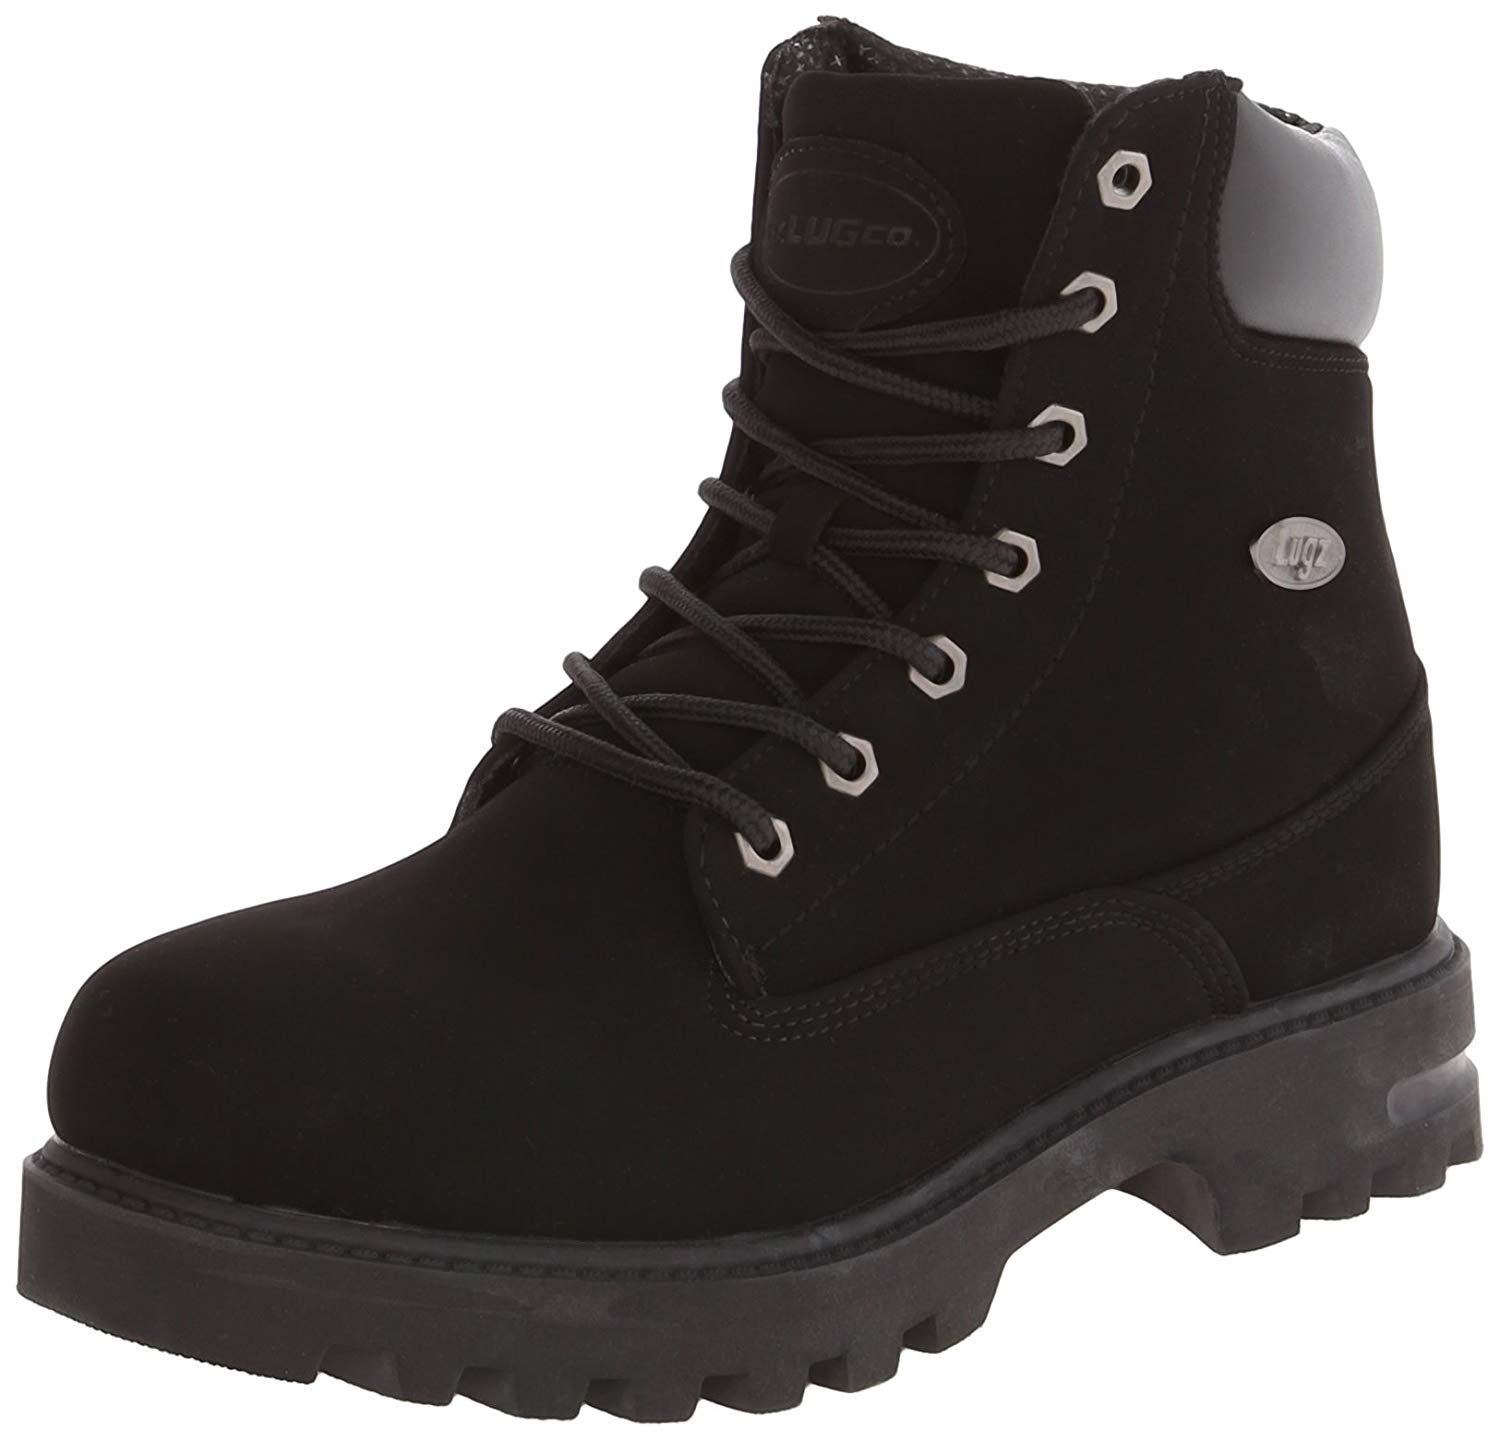 Lugz Mens FLEX STRIDE Closed Toe Ankle Safety Boots, Black, Size 10.0 ...